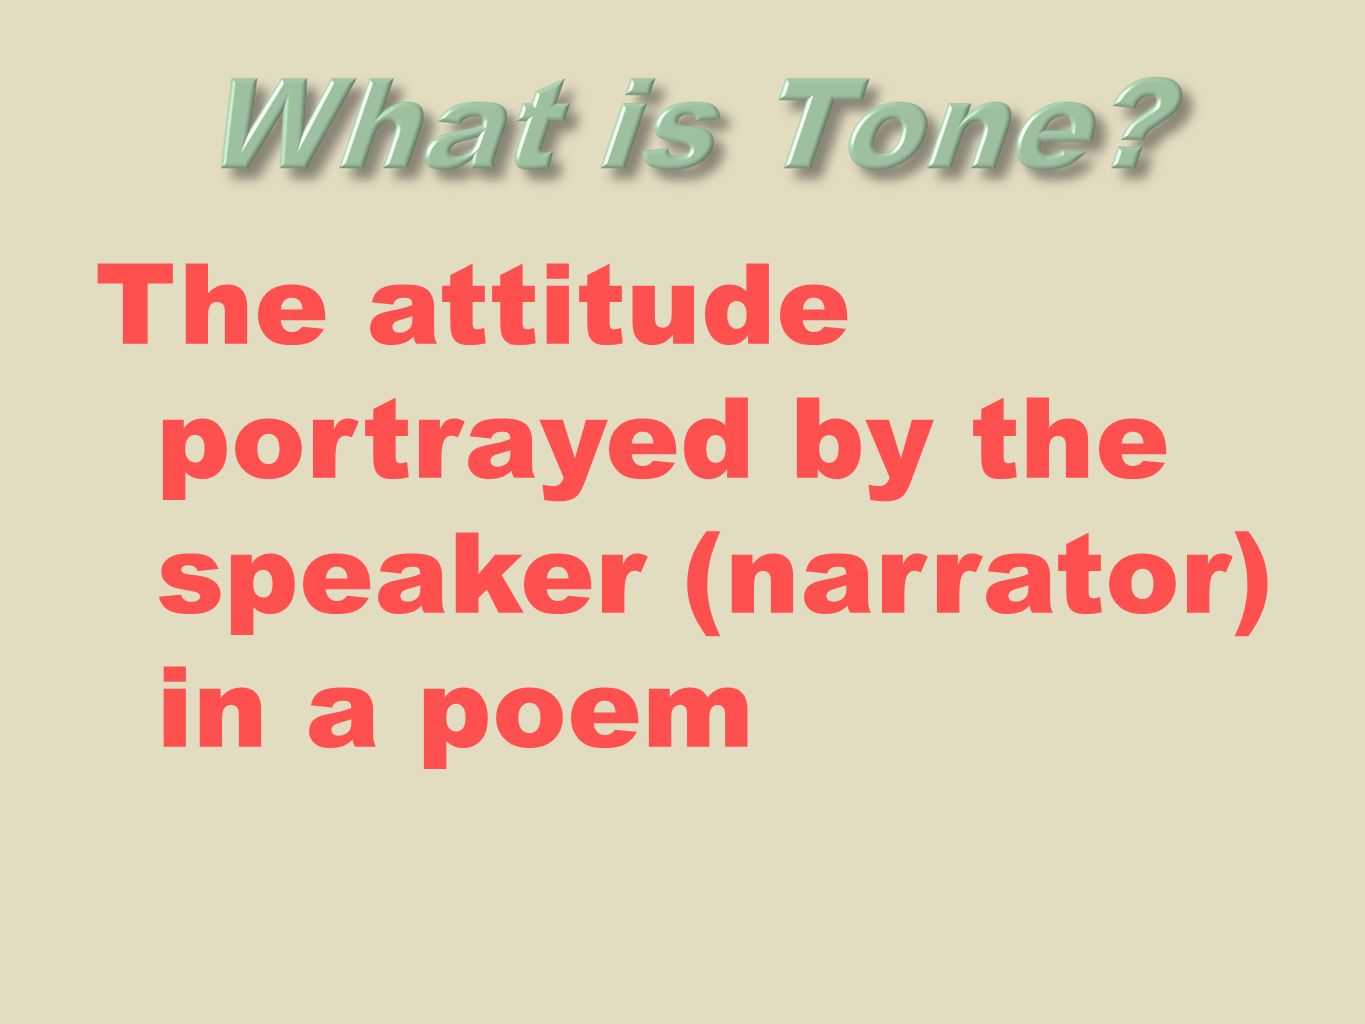 The attitude portrayed by the speaker (narrator) in a poem